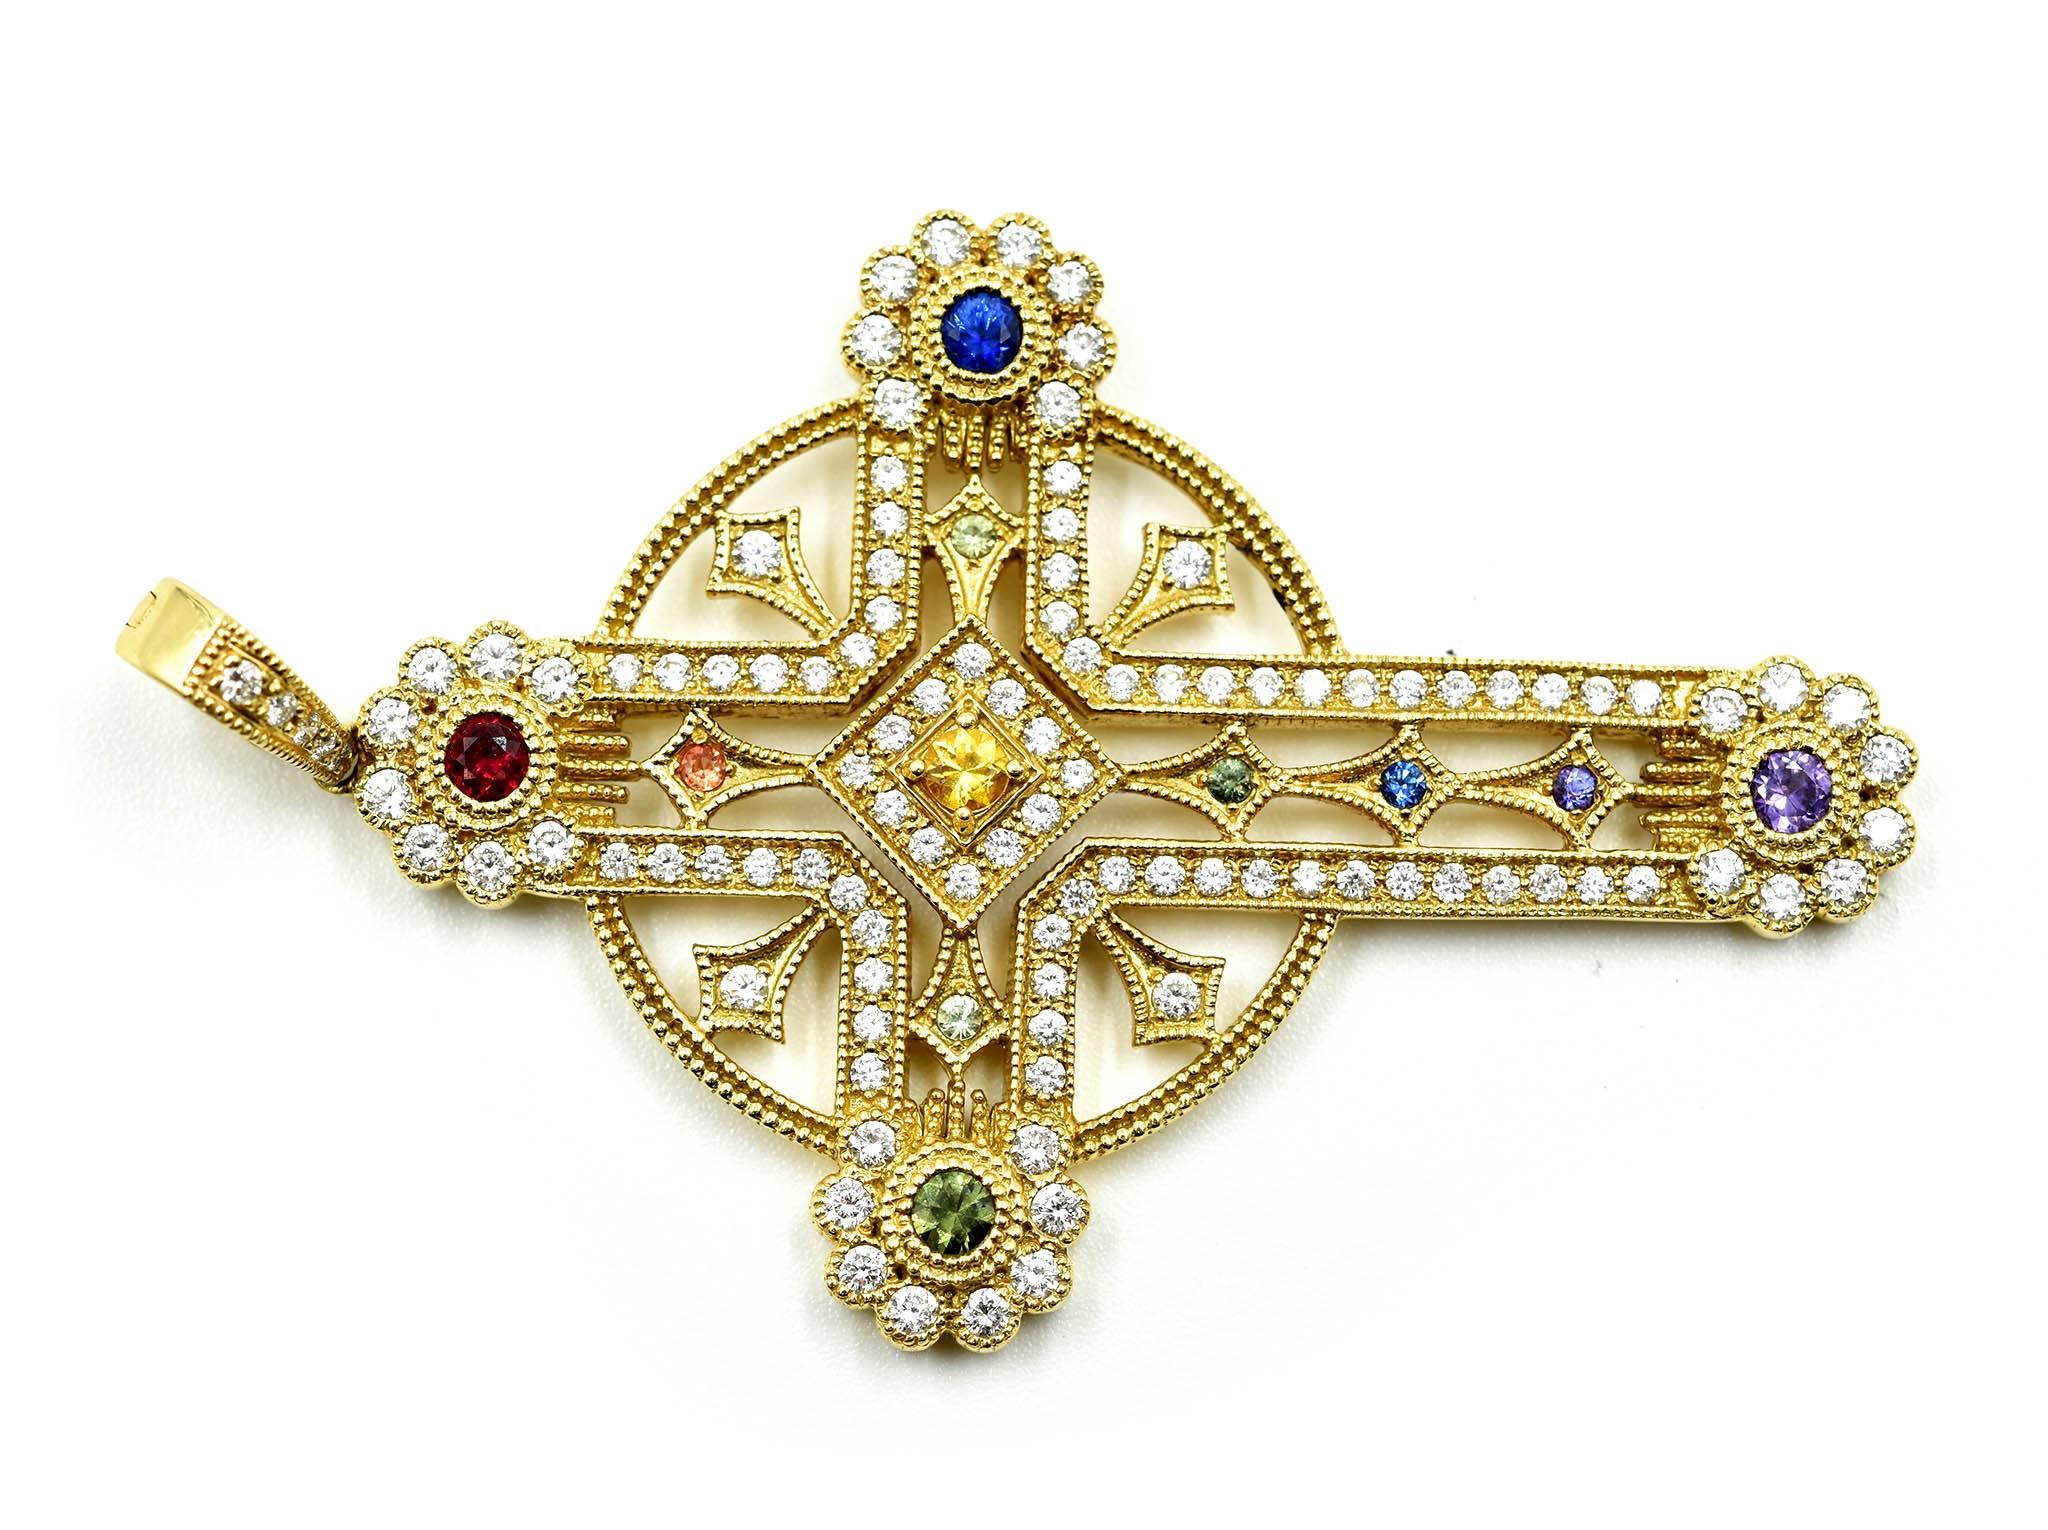 This fabulous cross pendant is made in 18k yellow gold. The cross is set with round diamonds and accented by various colors of sapphire. The diamonds have a total weight of 1.23cts, and the sapphires weigh 0.55ct. The cross measures 59x36mm, and it